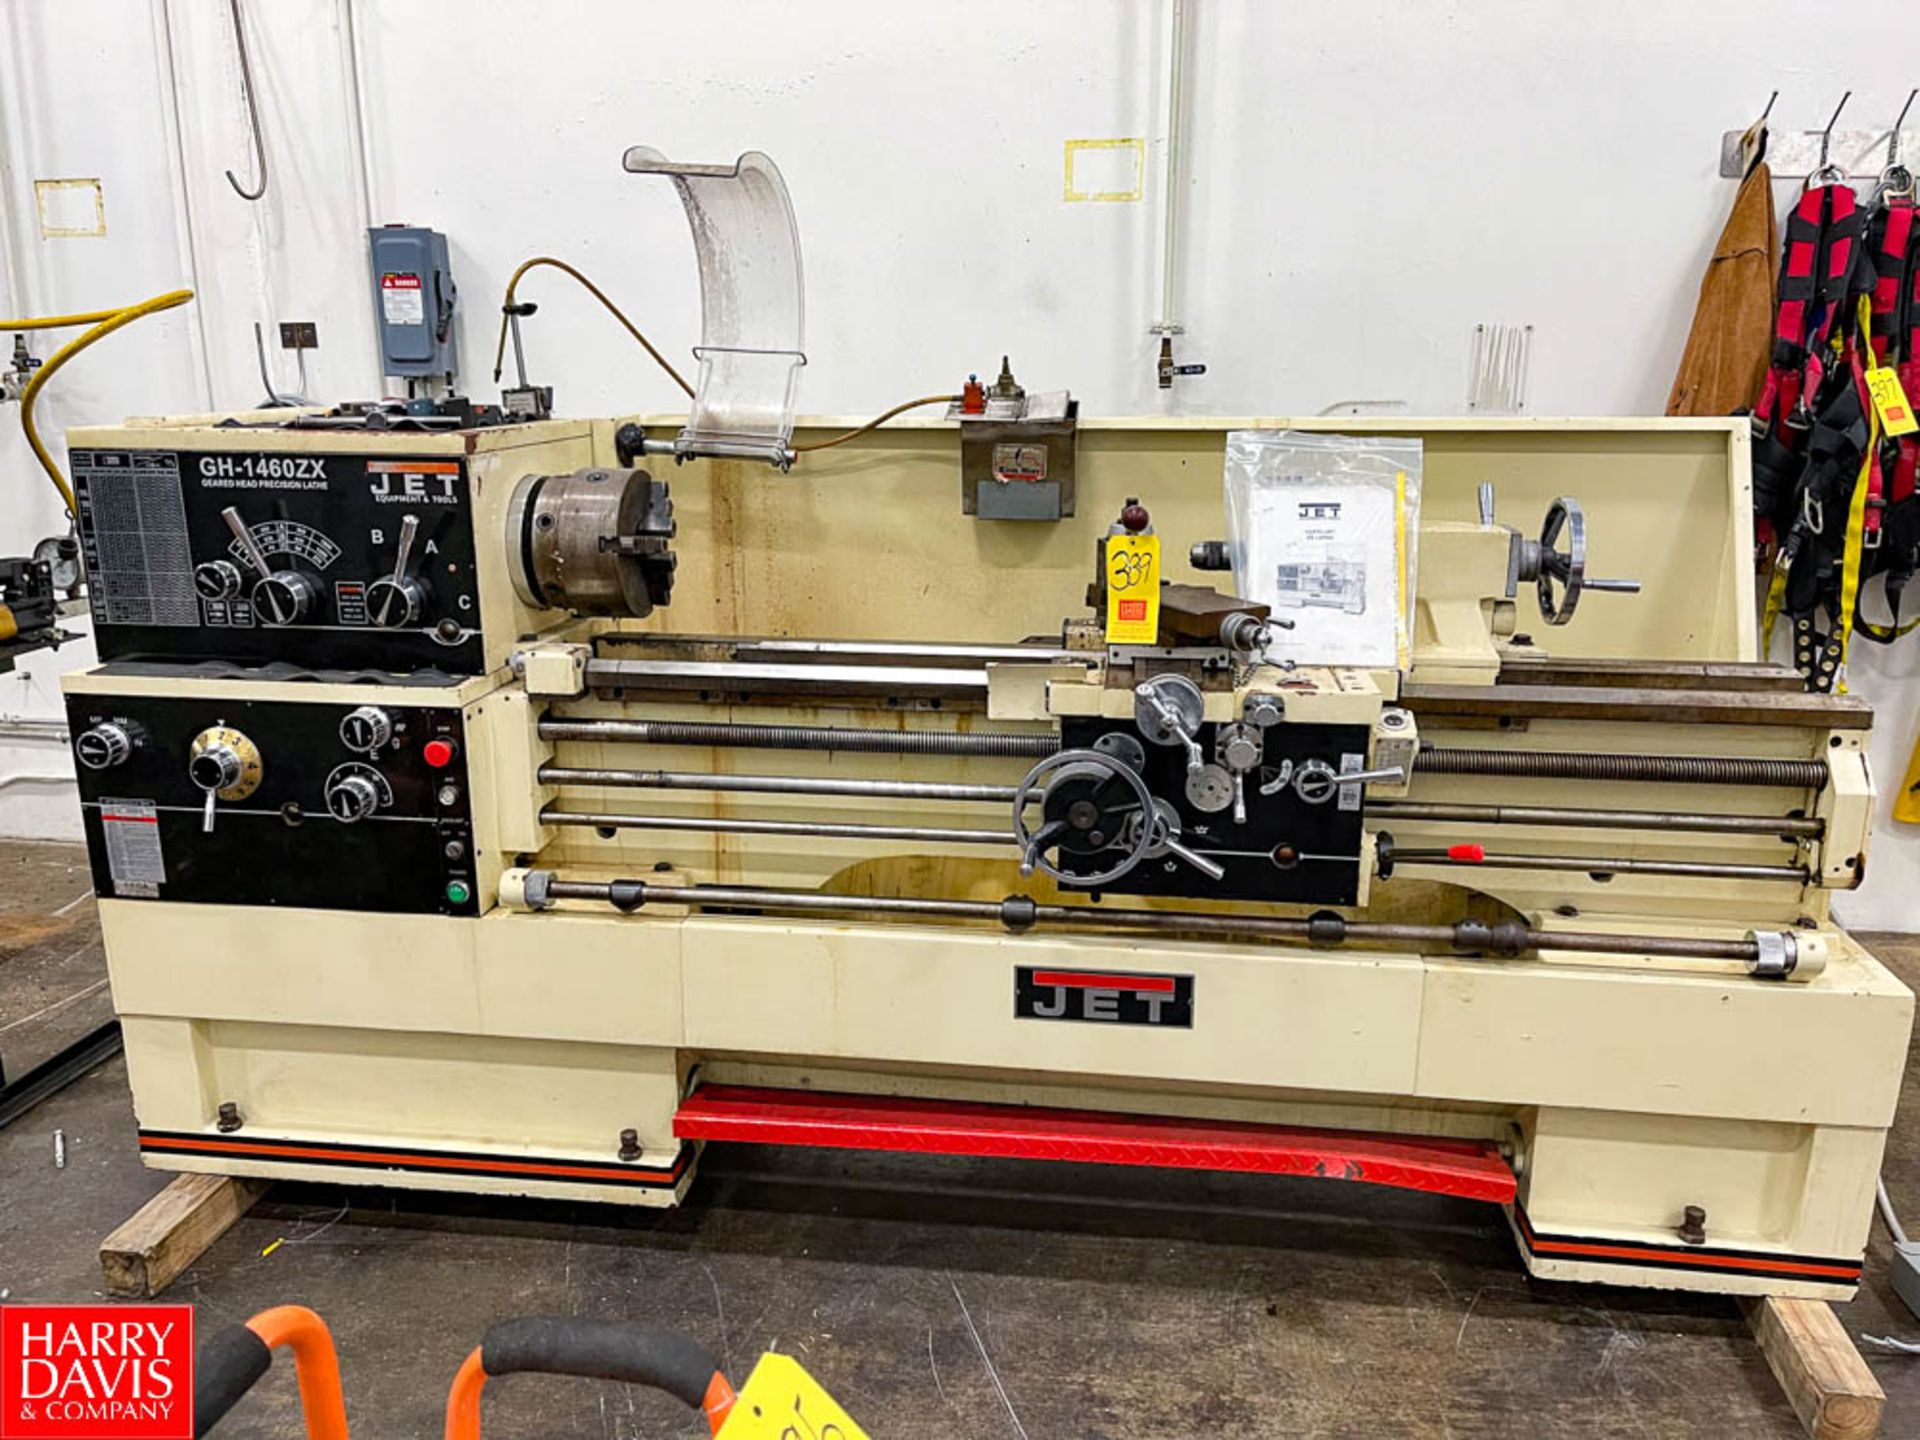 Jet Lathe Model GH-1460ZX with 3 Jaw Chuck Rigging Fee: $ 300